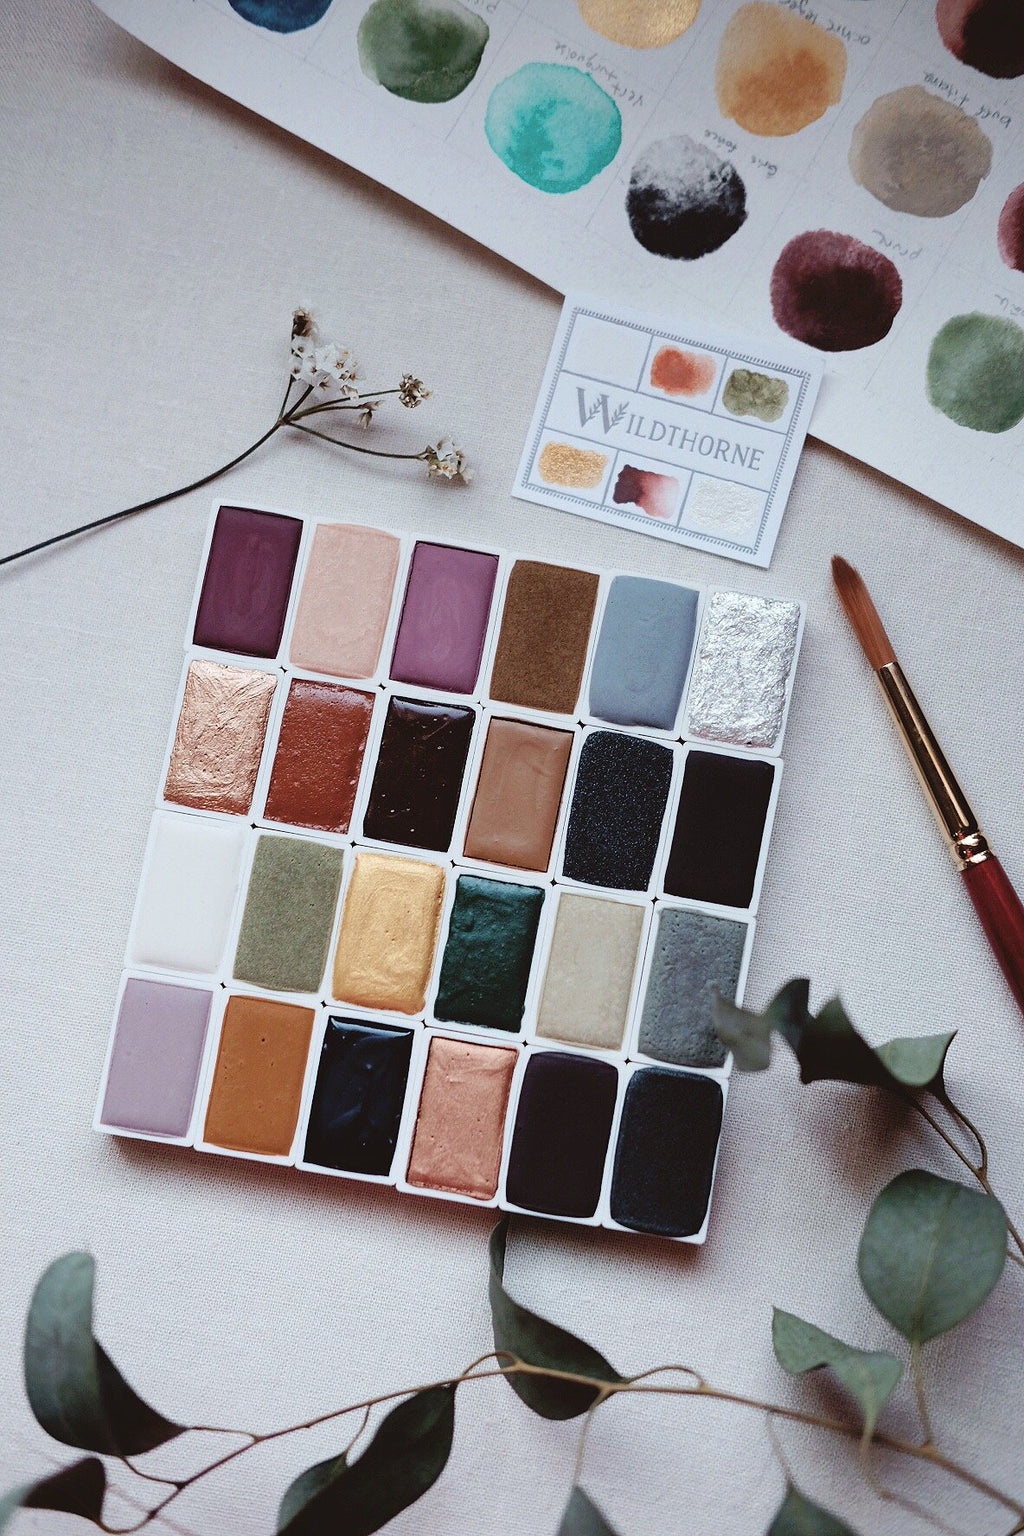 Full pan - Limited edition Gemstone & Mineral watercolors